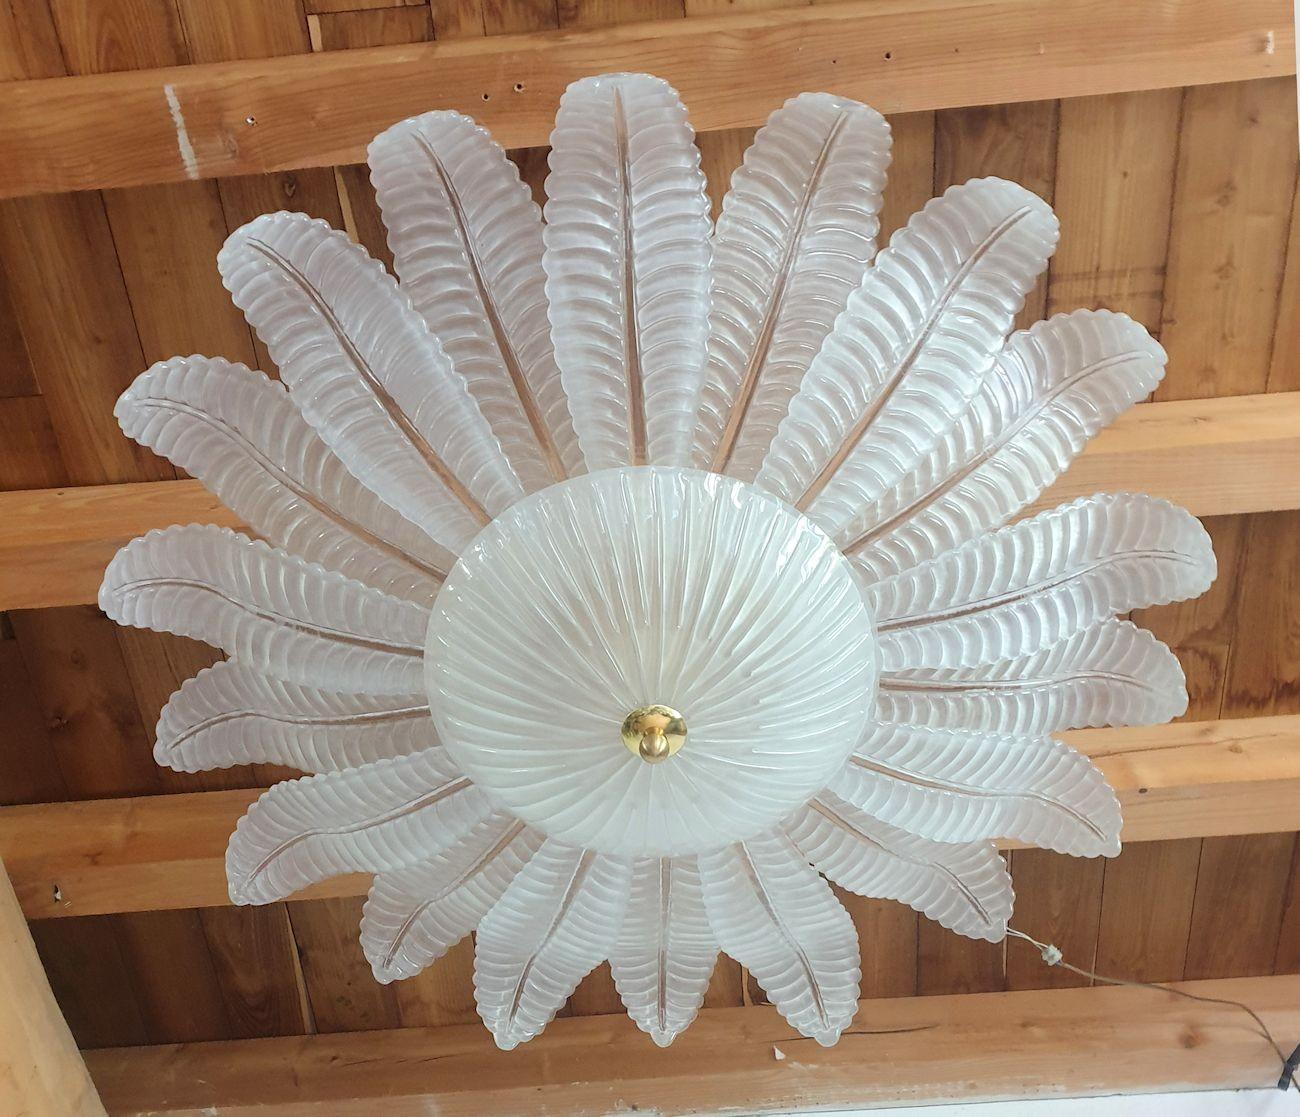 Extra large Leaf Murano glass Mid-Century Modern flush-mount chandelier, by Barovier and Toso, Italy 1970s.
The Vintage Chandelier is made of large frosted Murano glass leaves and a center bowl, on a gold plated frame.
The glass is translucent,